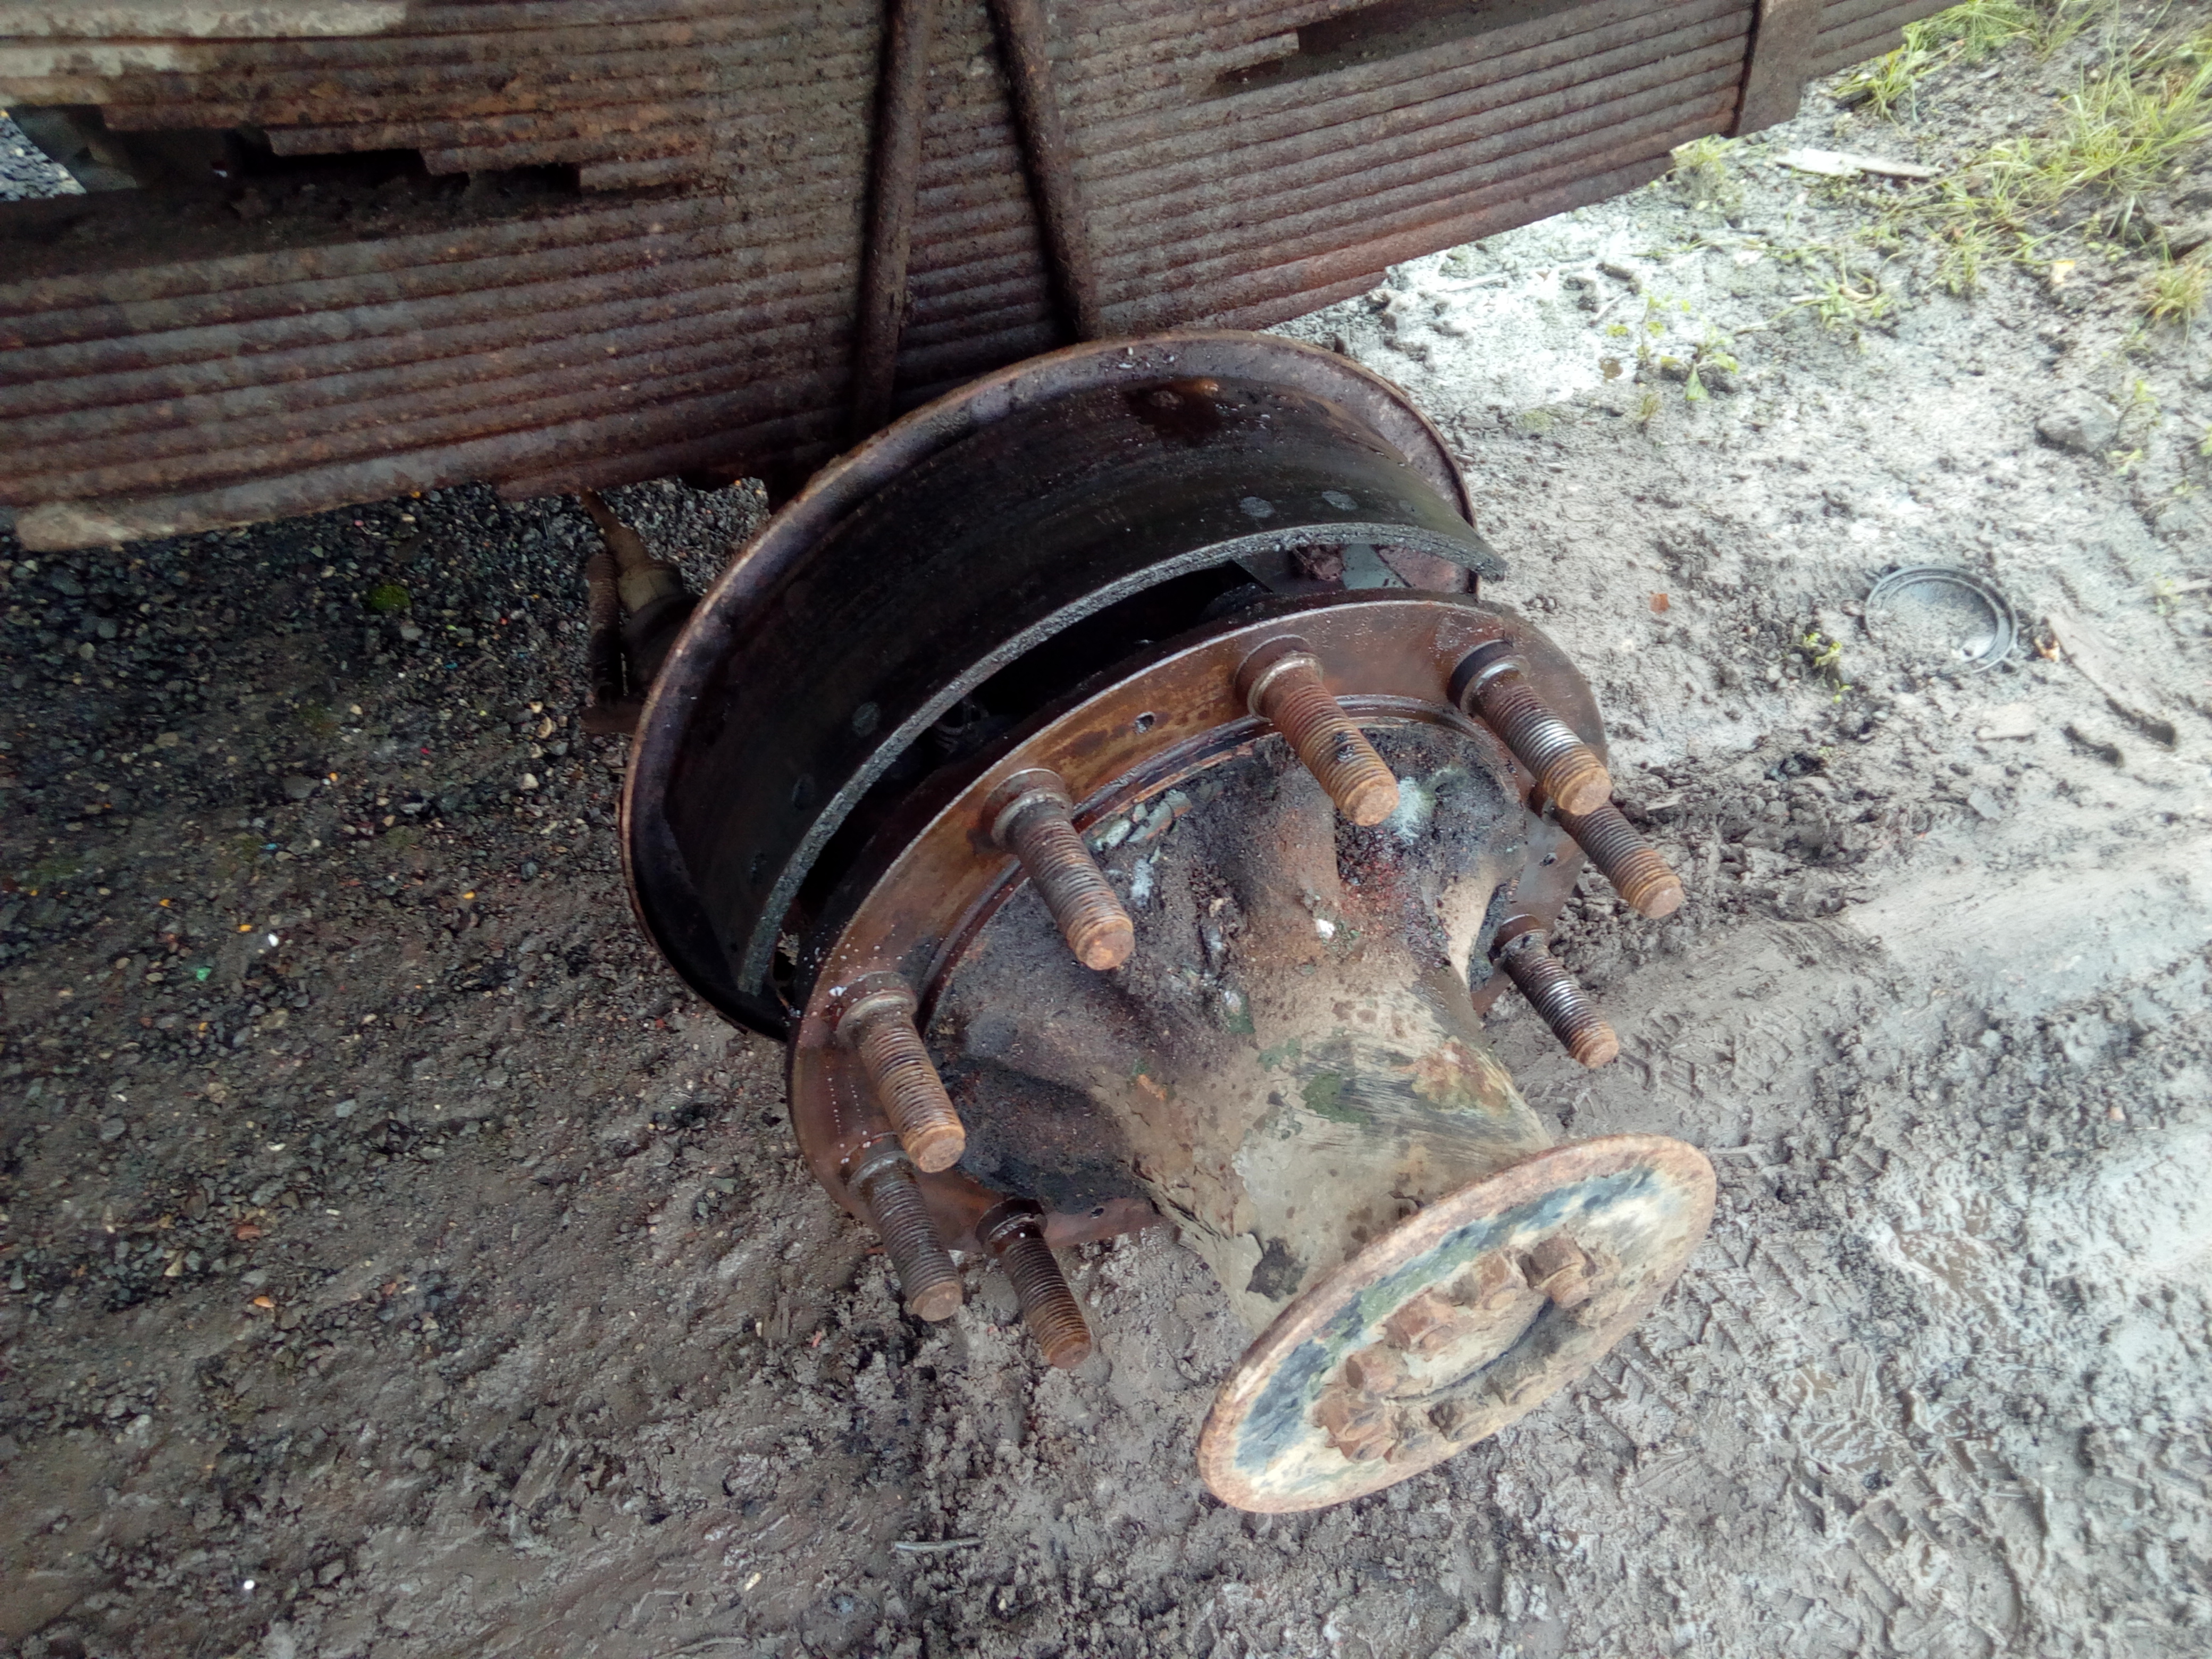 A photograph showing the back axle of the truck, with the brake
drum removed, and it is shown that the flange of the hub prevents easy
access to the springs and retaining clips of the brake shoes.